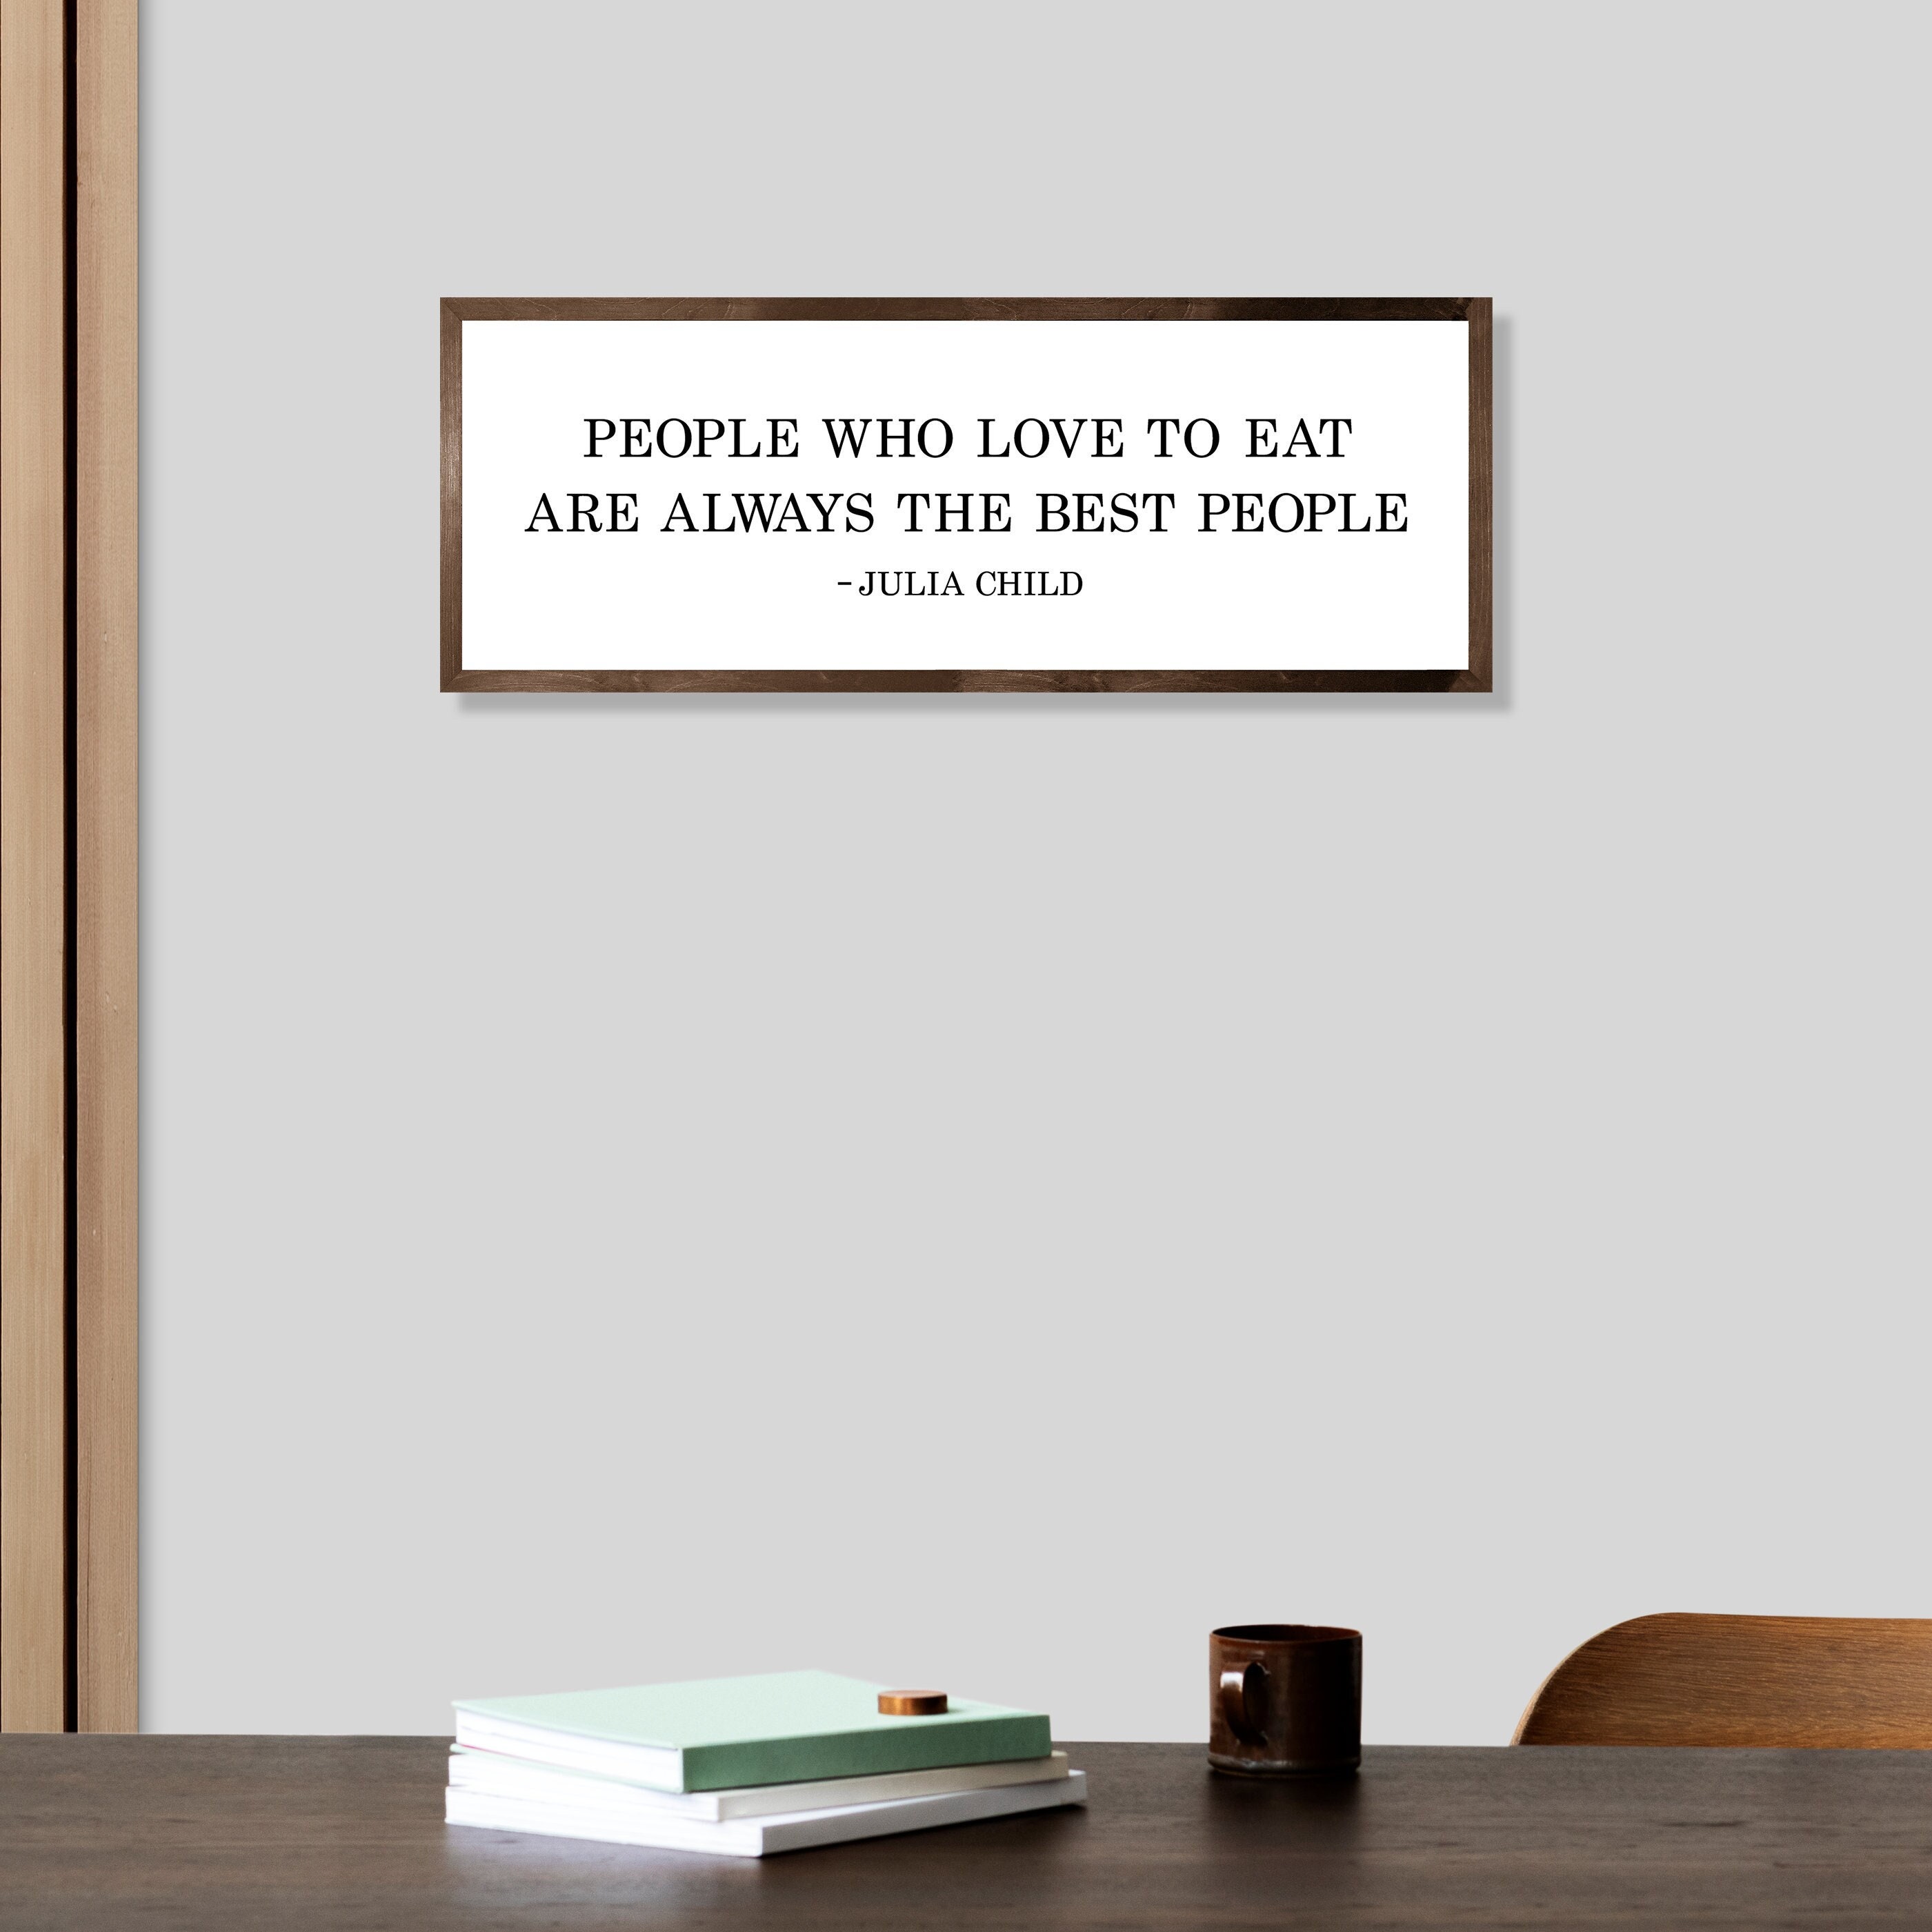 People who love to eat are always the best people sign-julia child  quote-dining room decor-wall sign for kitchen wall decor-kitchen sign